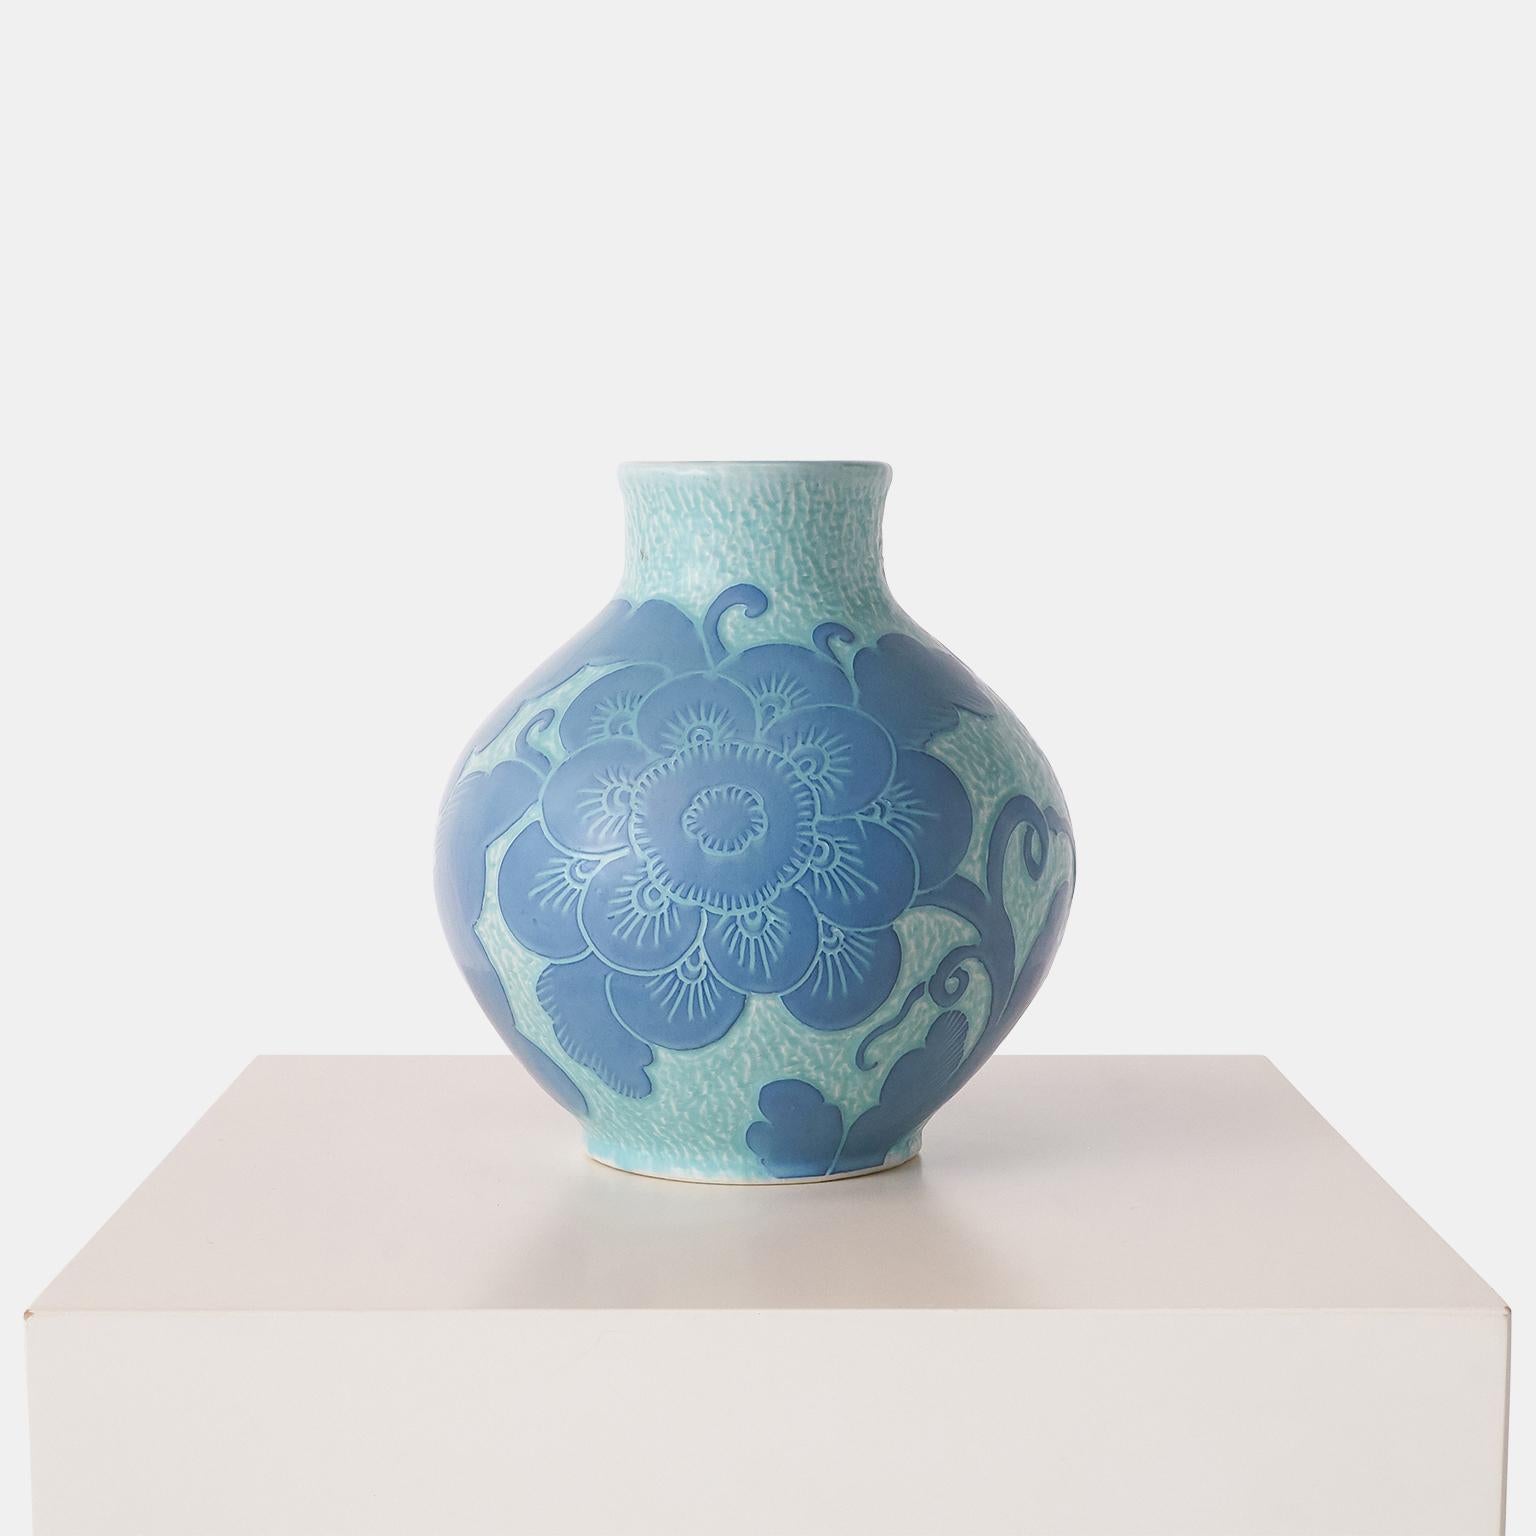 A handmade blue vase by Josef Ekberg for Gustavsberg. Each piece is unique and decorated with the Sgrafitto technique that was developed by Ekberg himself.

Signed : Gustavsberg, 1919, J Ekberg.